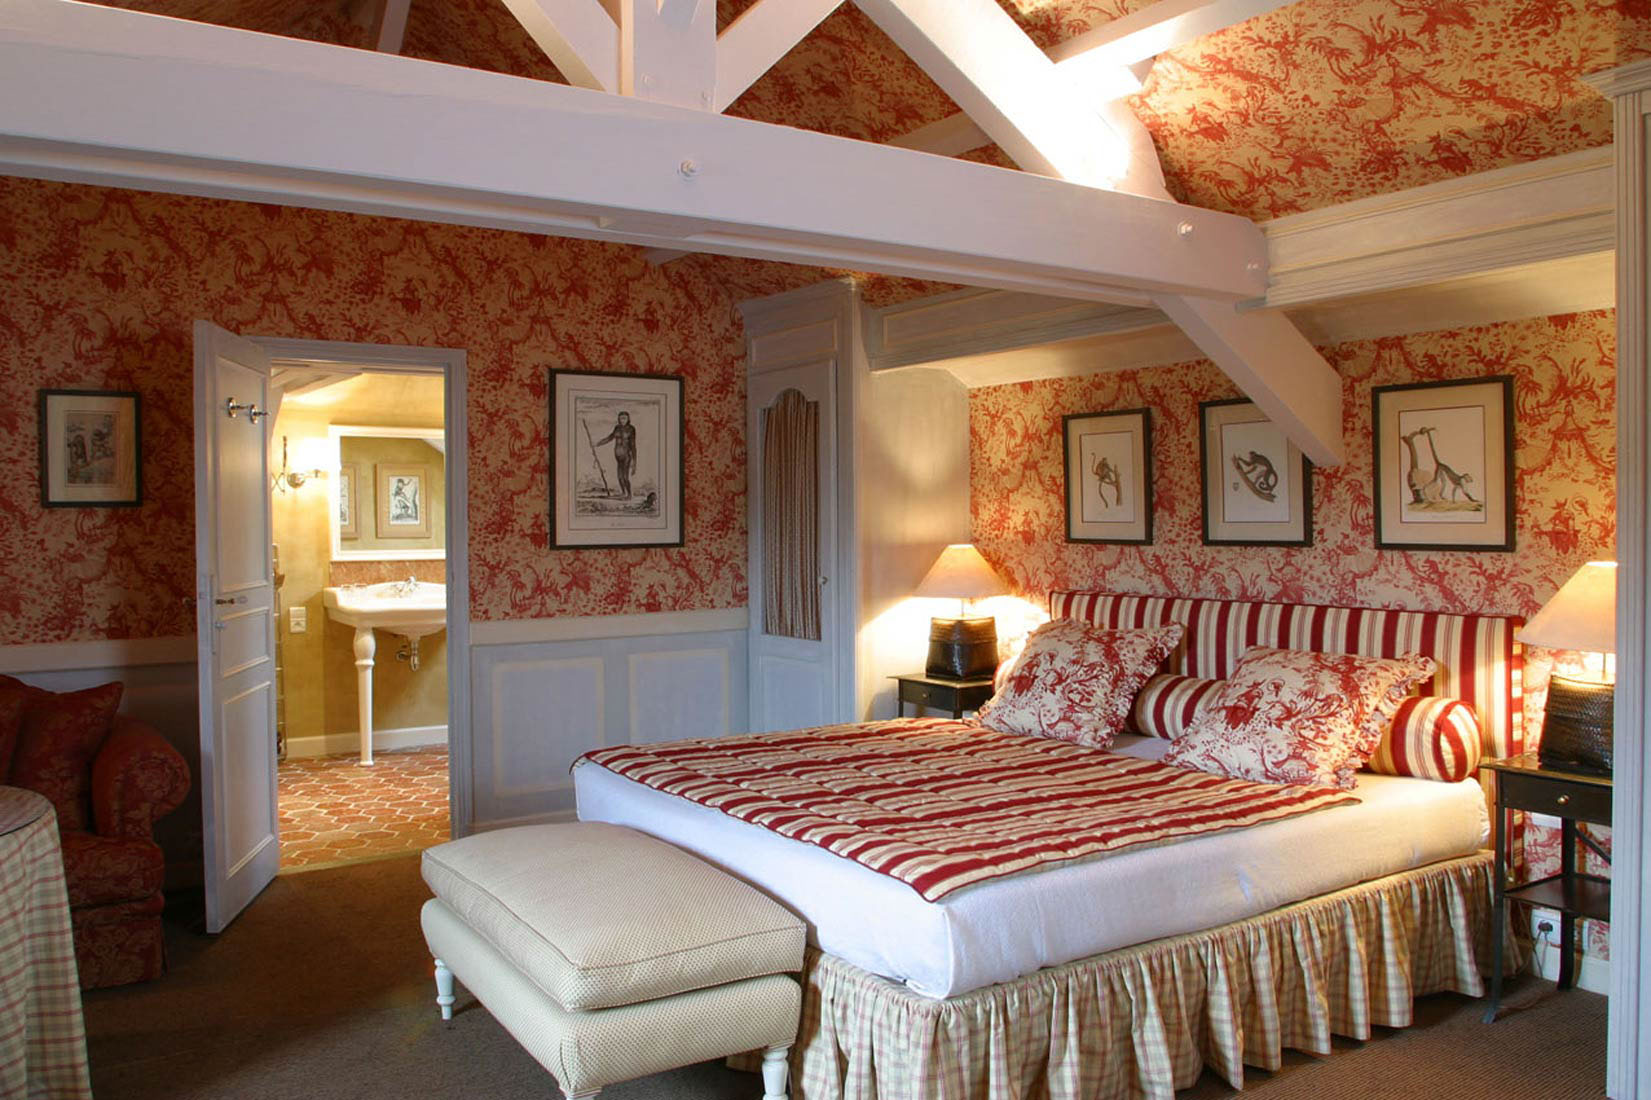 French Country Style Bedroom